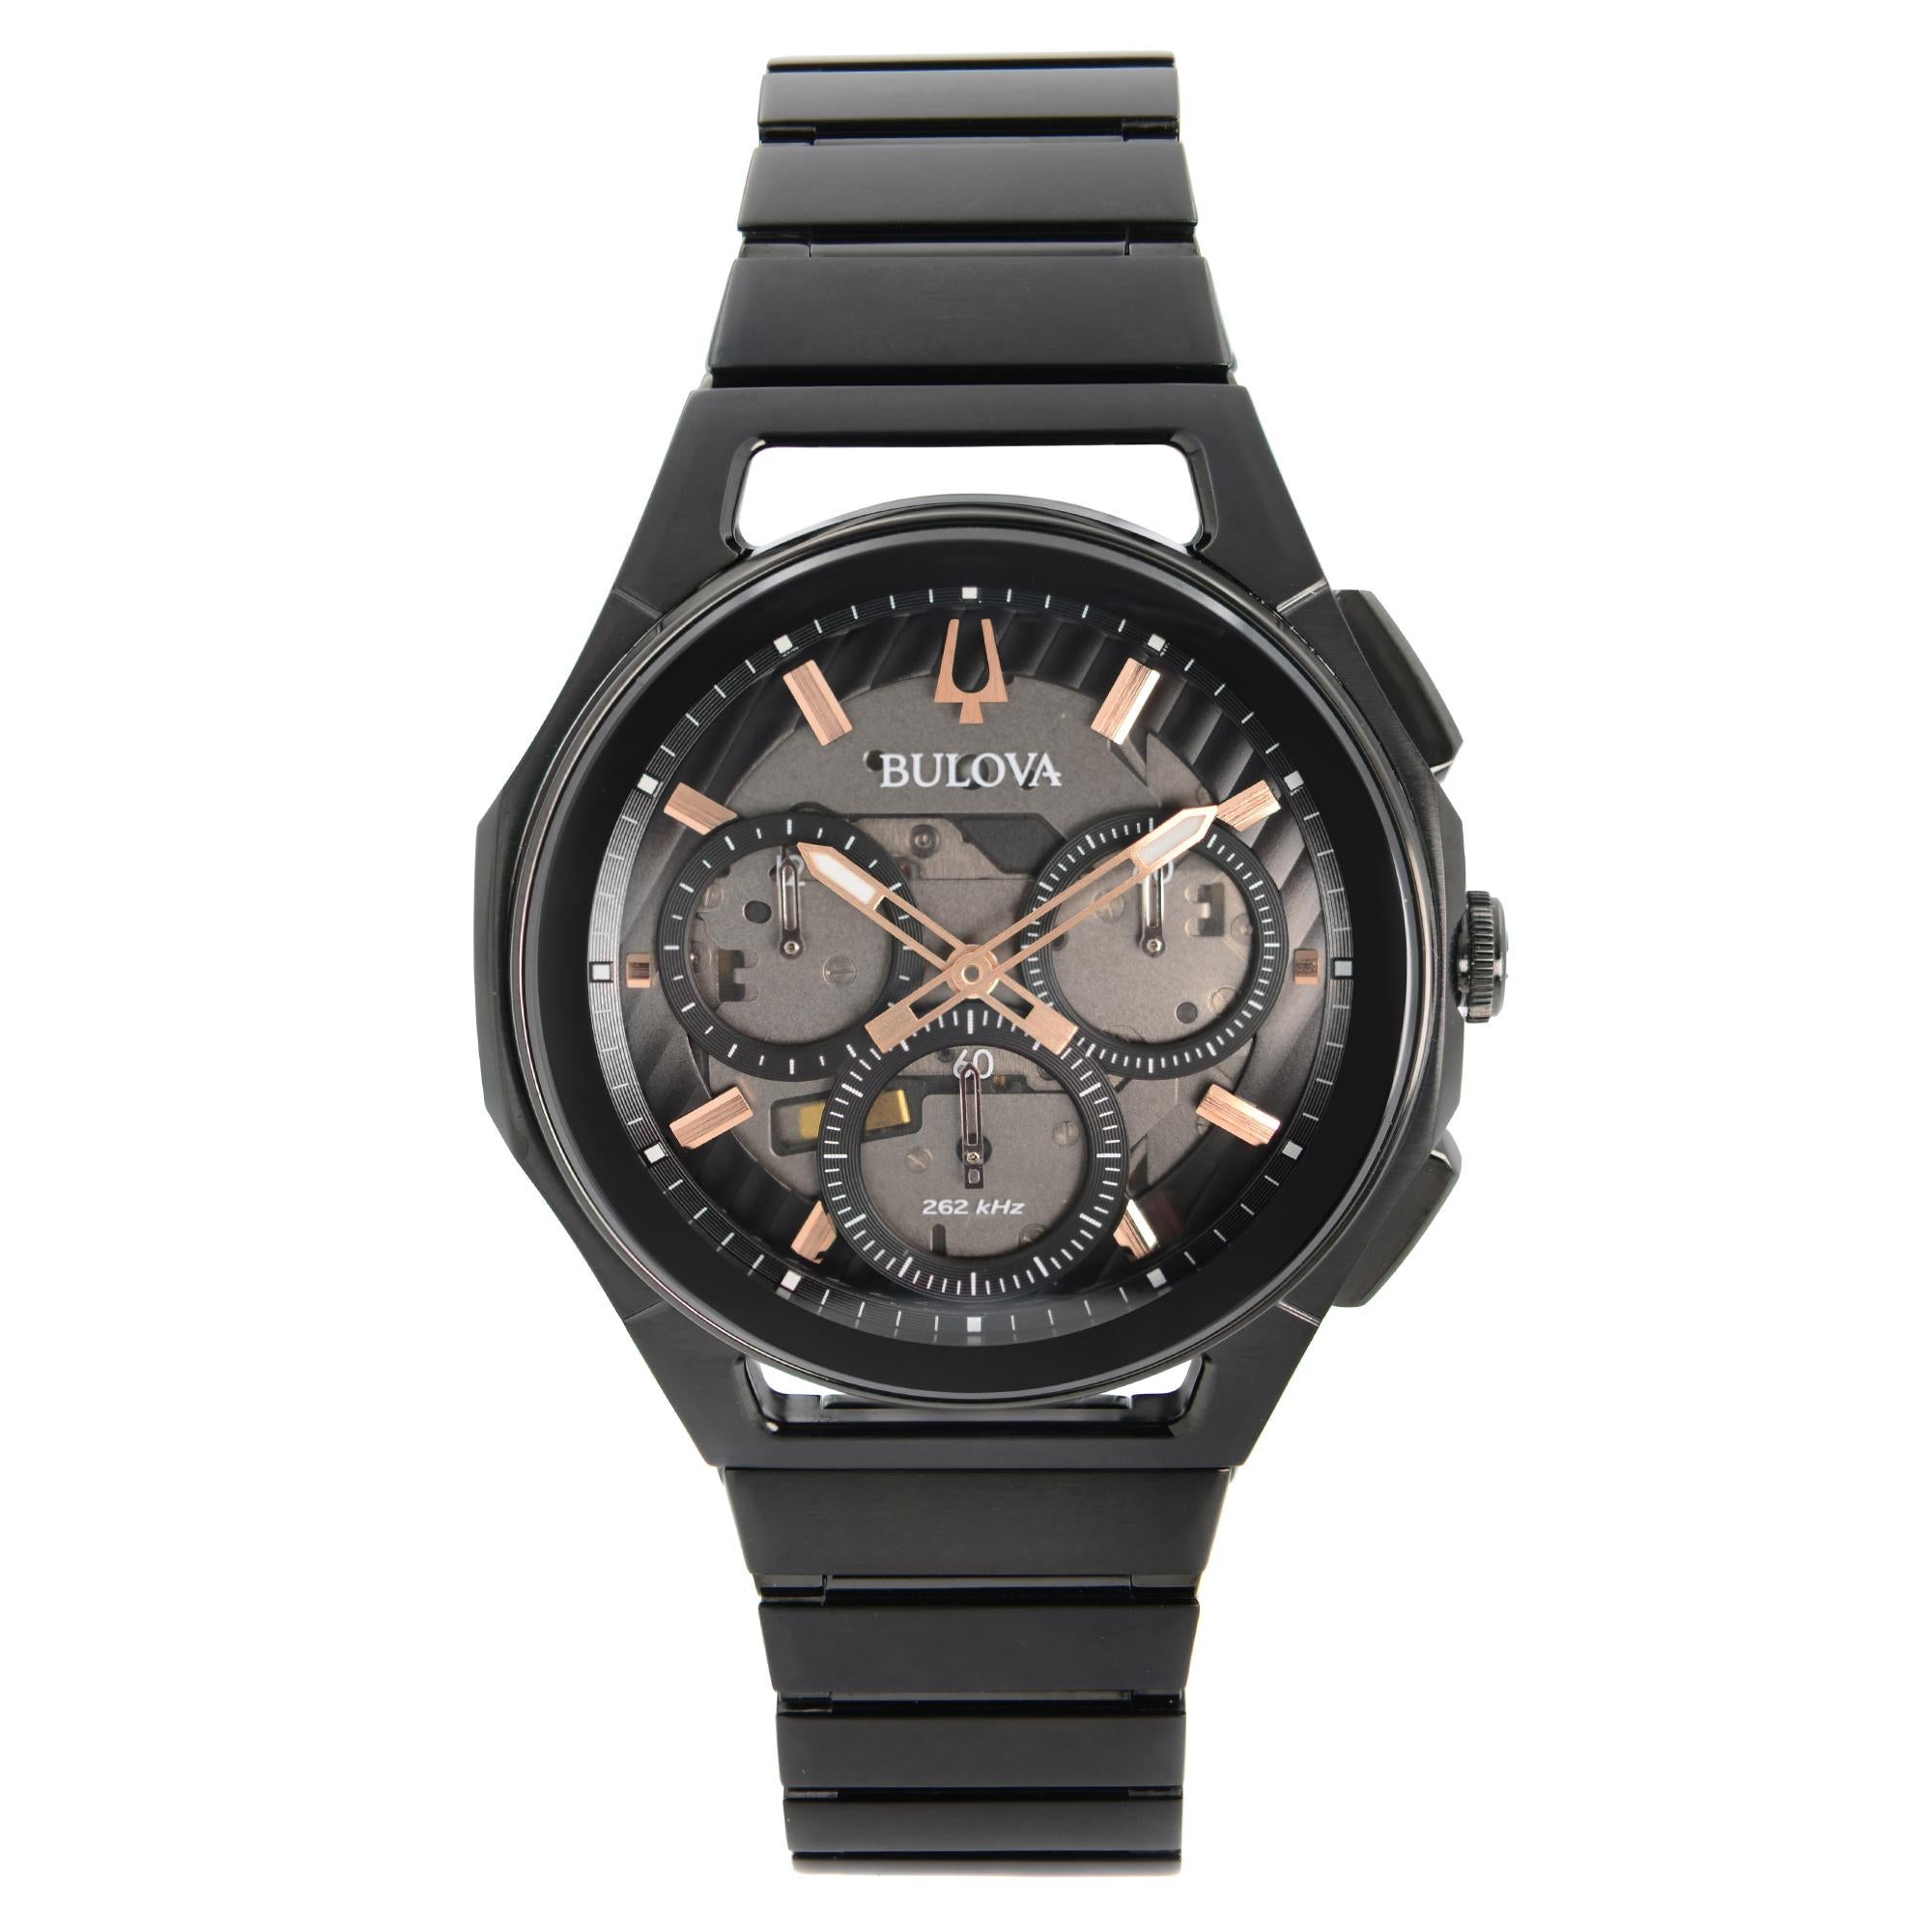 Unworn Bulova Curv 44mm Chronograph Stainless Steel Black Dial Quartz Men's Watch 98A207. This Beautiful Timepiece Features: Black Ion-Plated Stainless Steel Case and Bracelet. Fixed Black Ion-Plated Bezel. Black Dial with Luminous Rose Gold-Tone